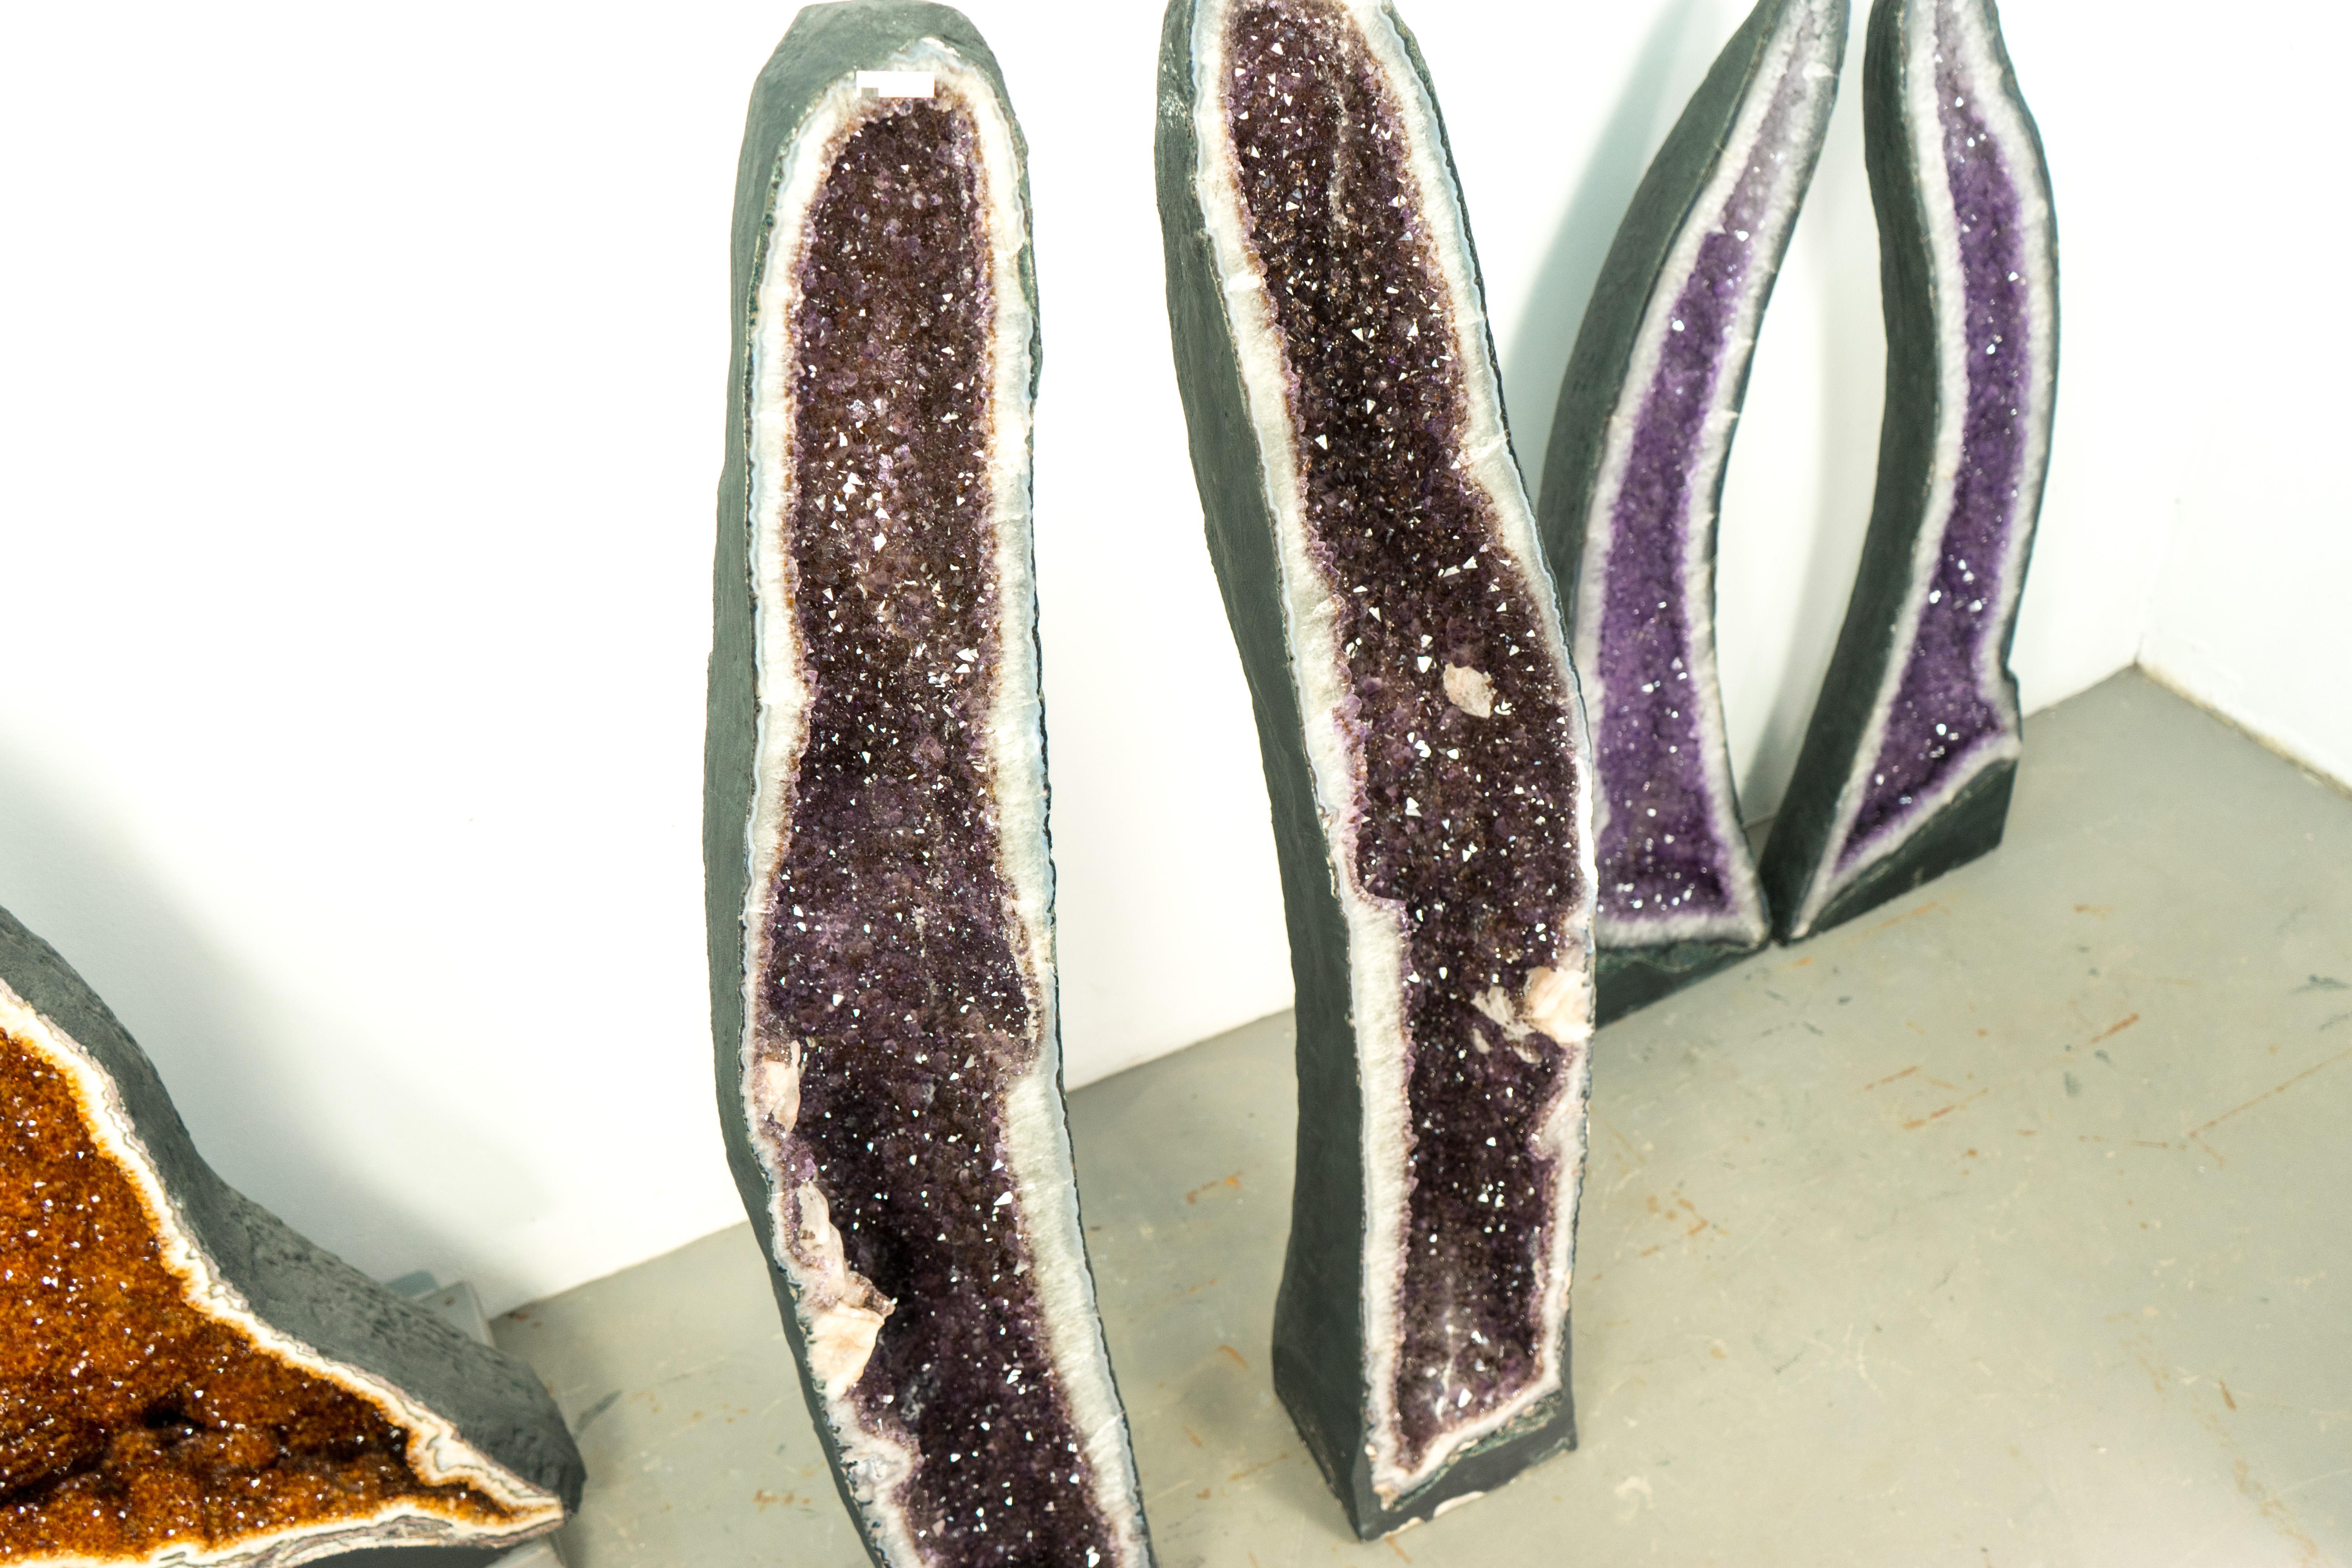 Pair of 5 Ft Tall Large Amethyst Geode Cathedrals with Sparkly Lavender Amethyst For Sale 6